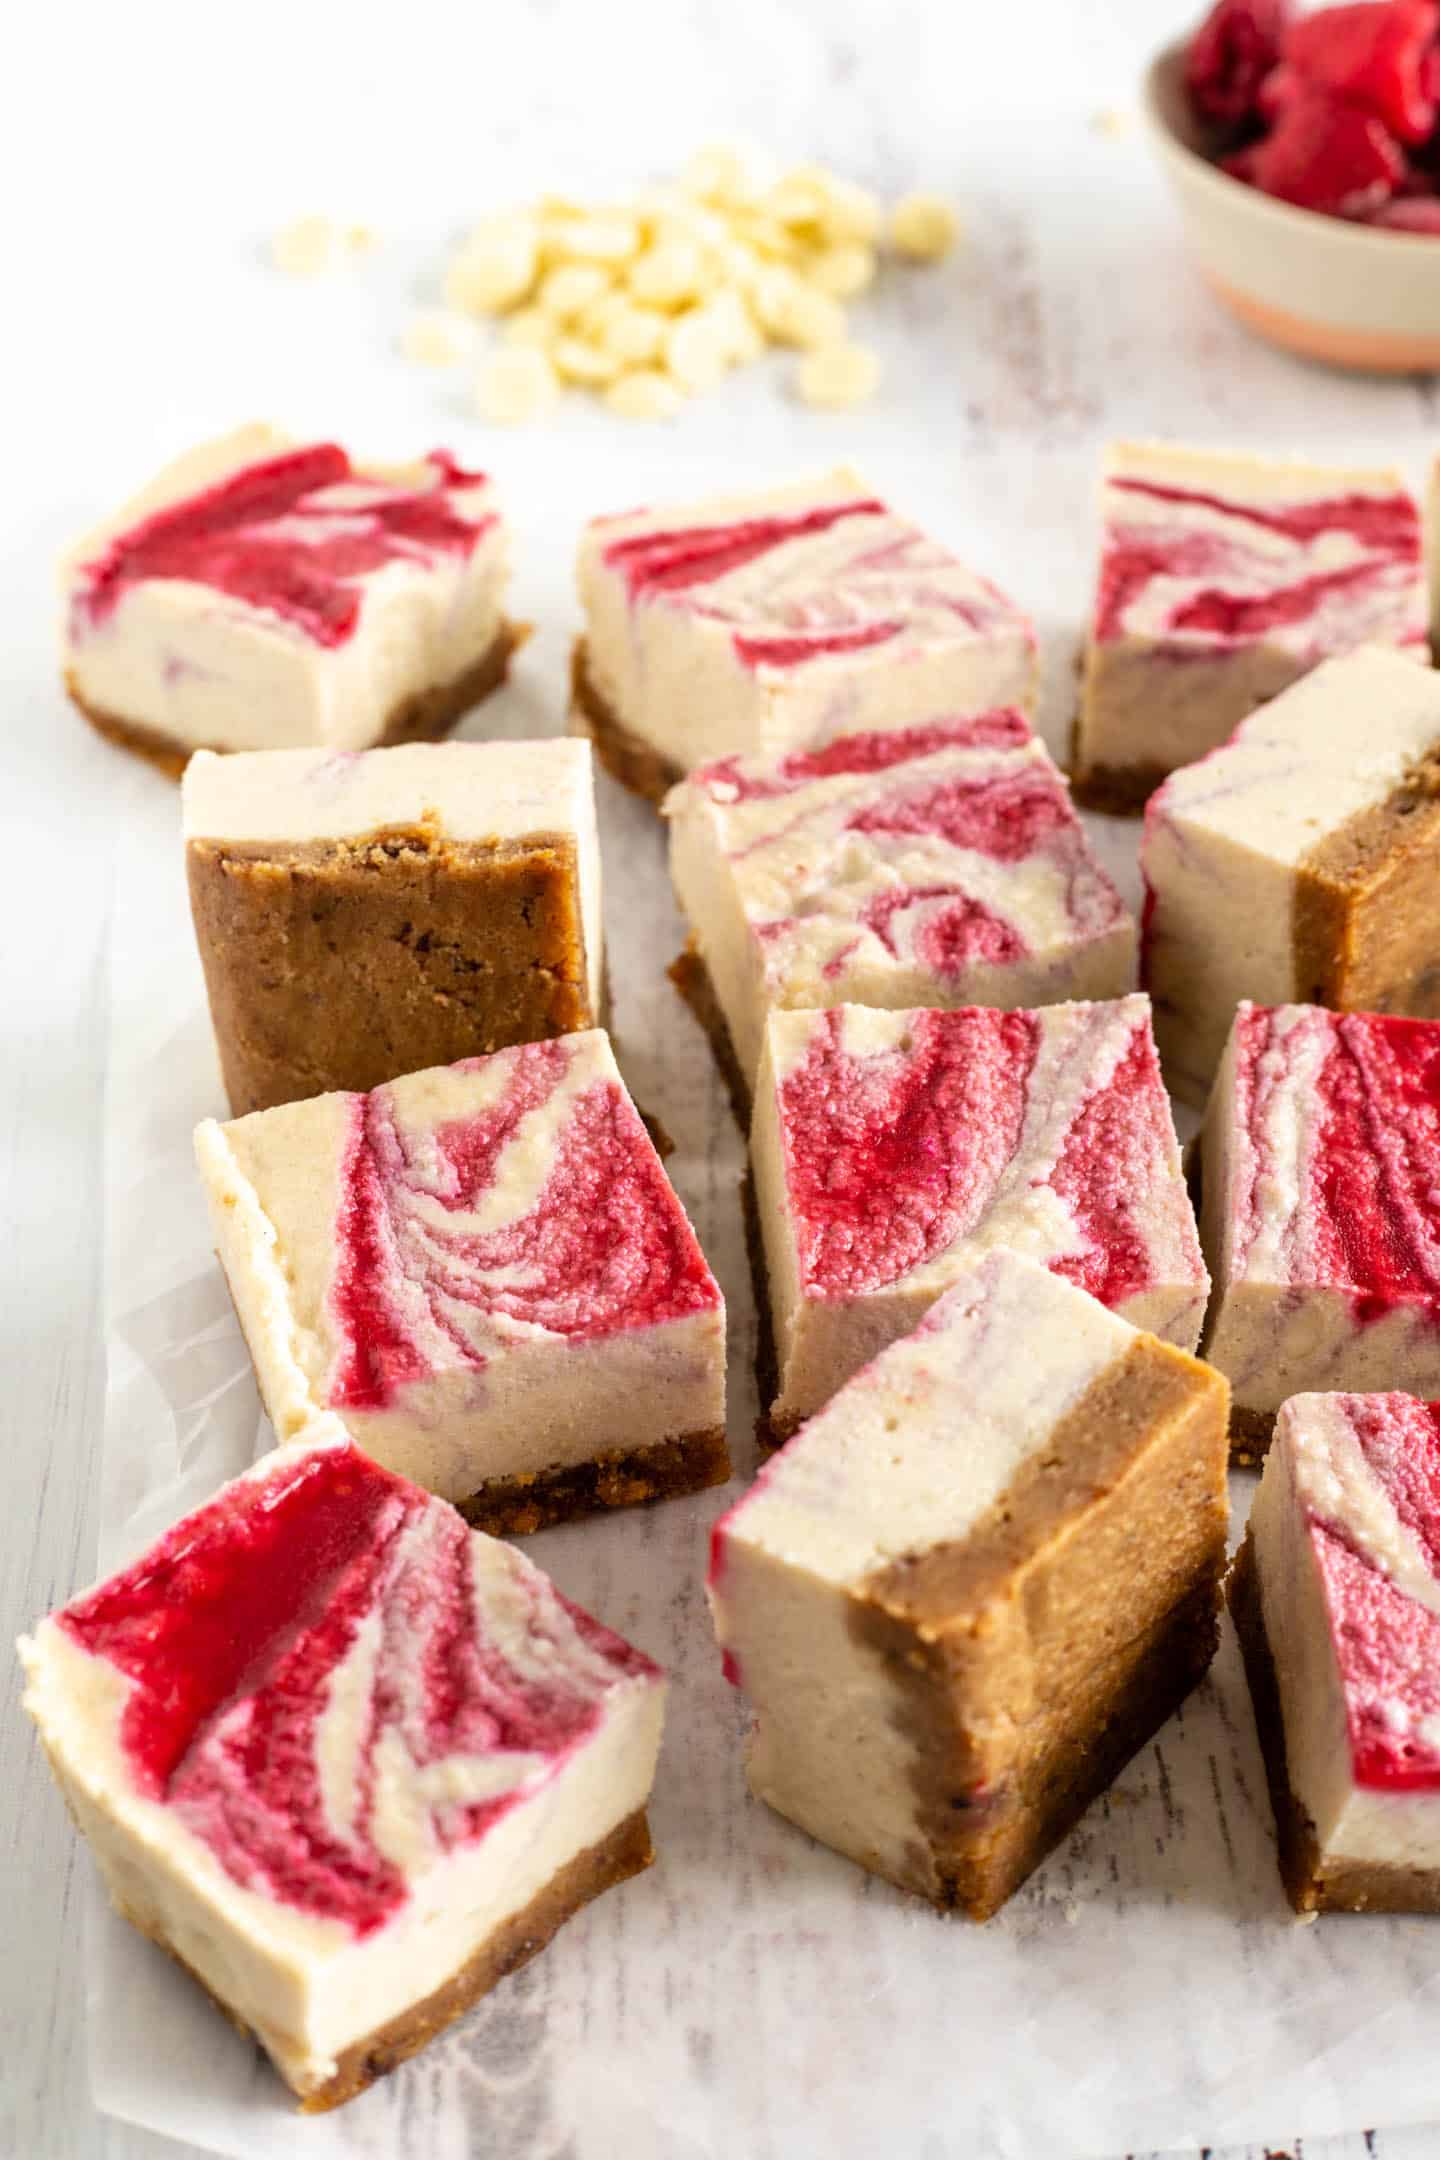 Raspberry and white chocolate bars on a white surface